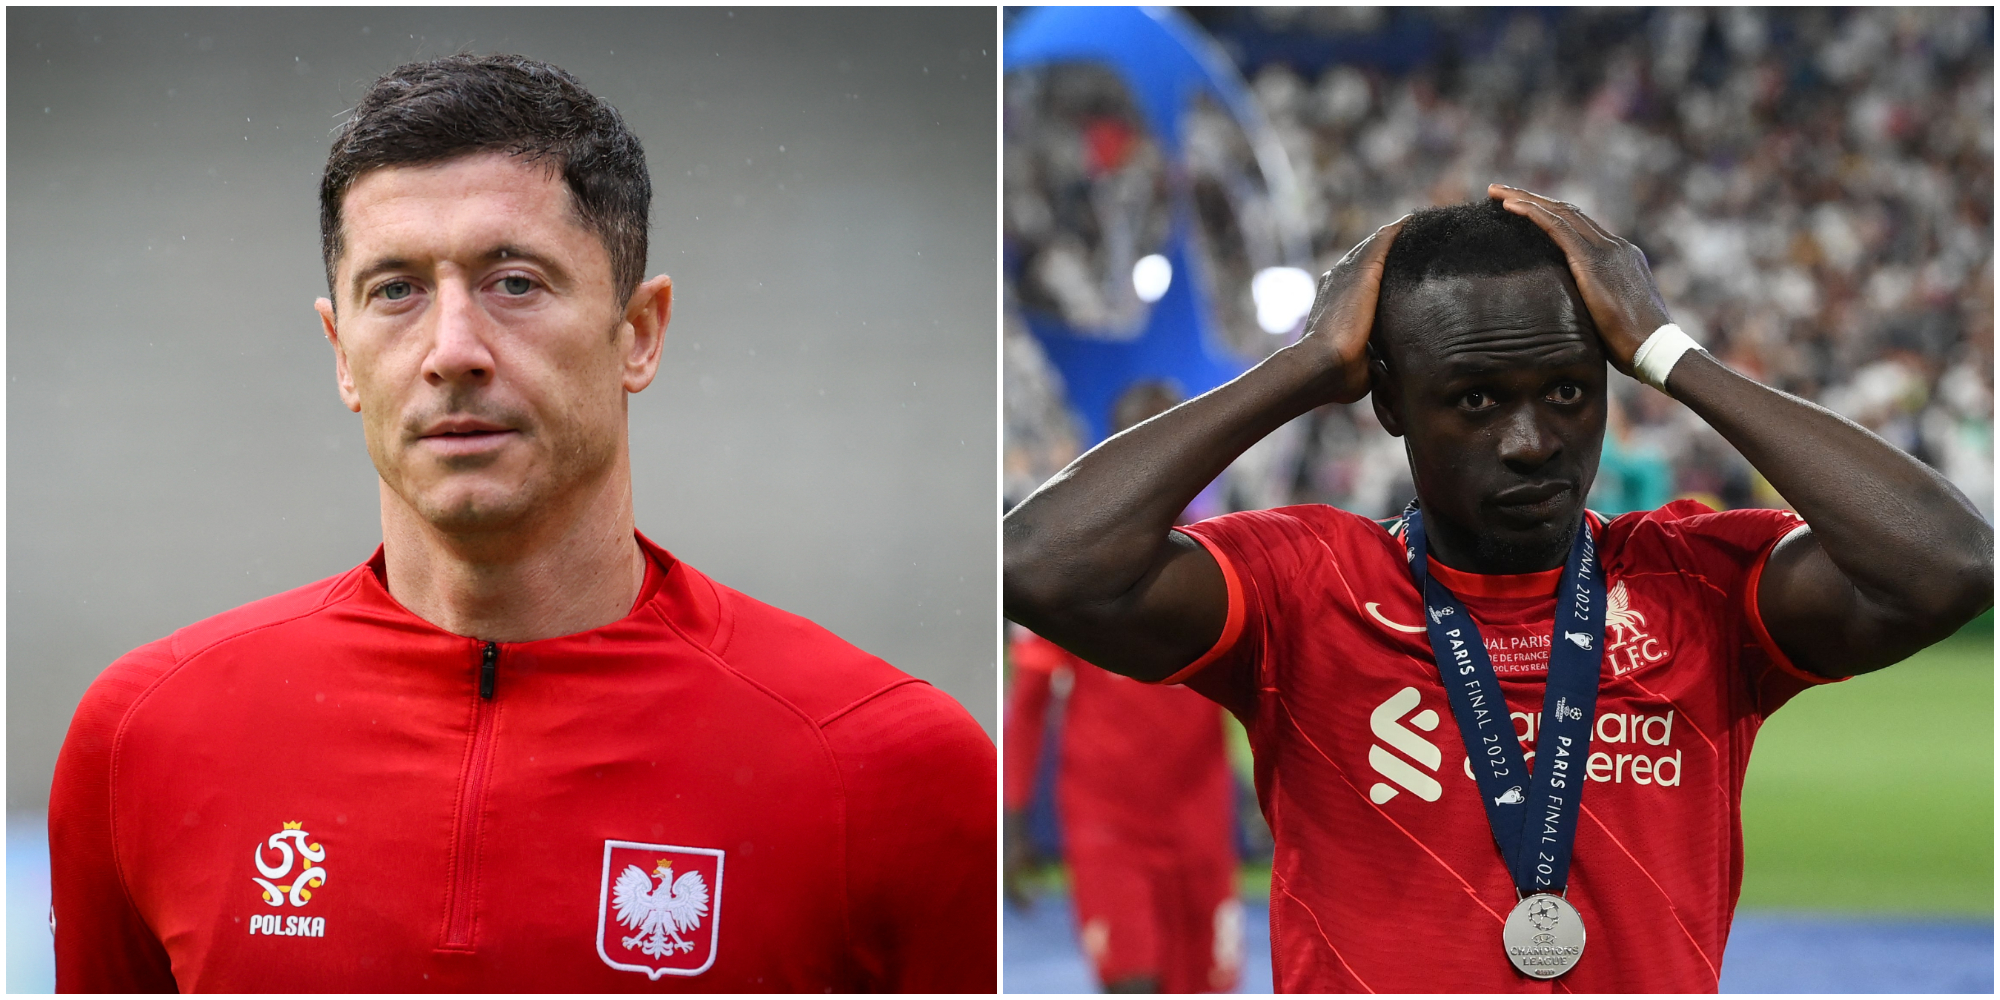 Lewandowski could help Liverpool secure ideal transfer fee for Sadio Mane as Reds hope for improvement on laughable bid